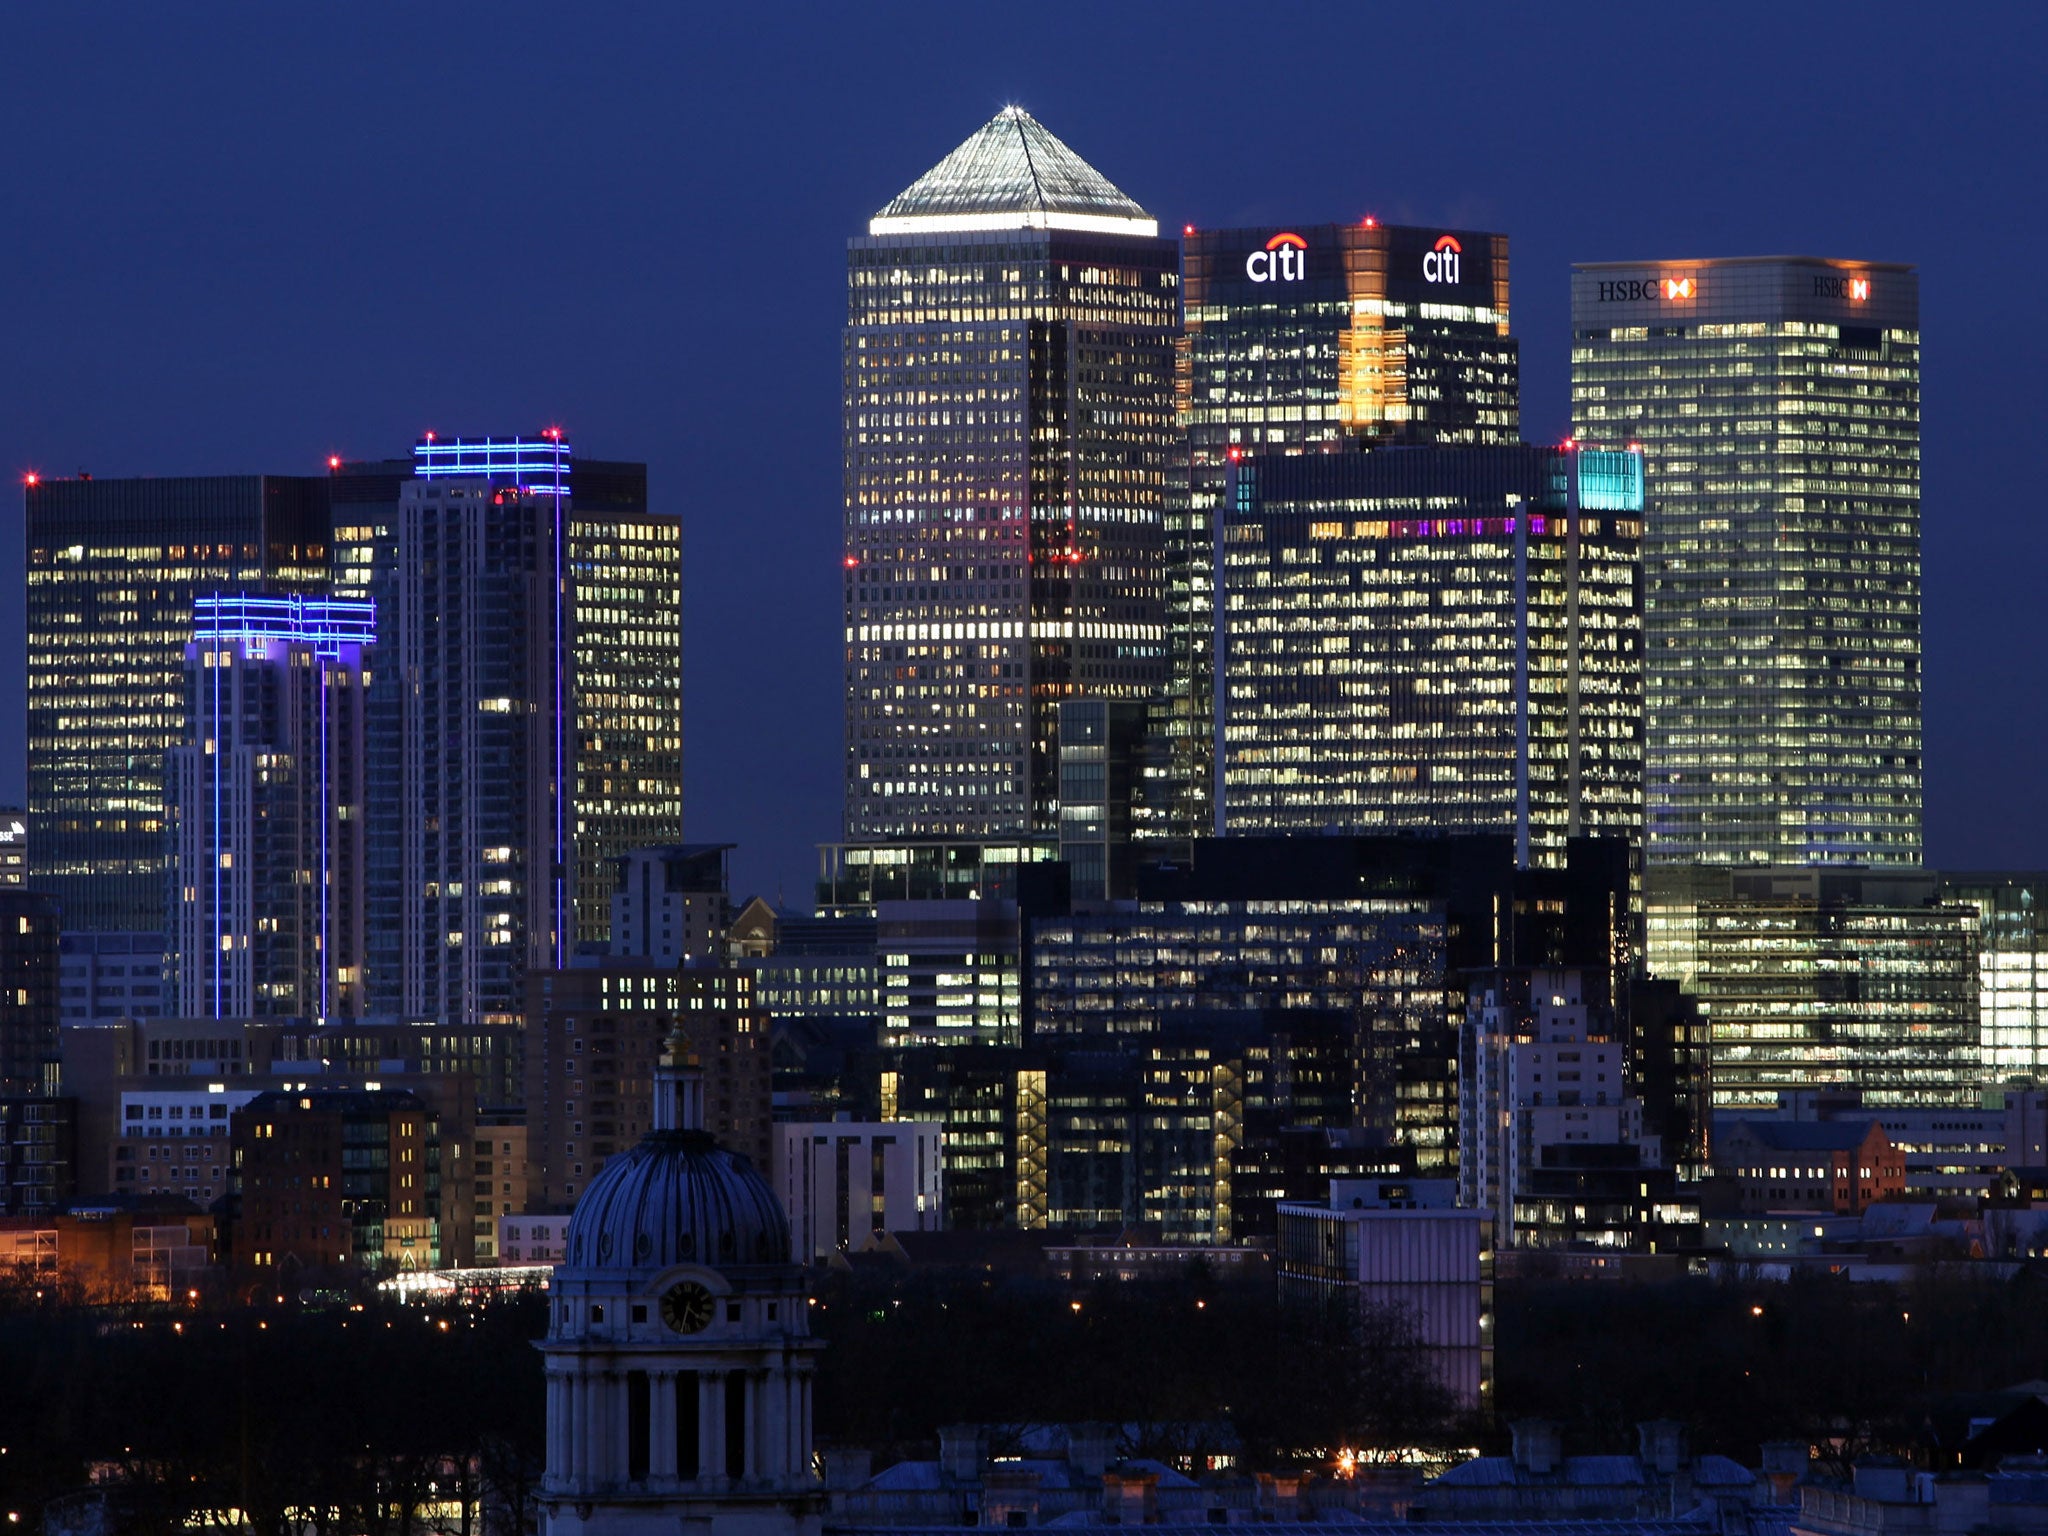 Some of the UK's leading banking establishments have been implicated in the leaks - dubbed the FinCEN Files